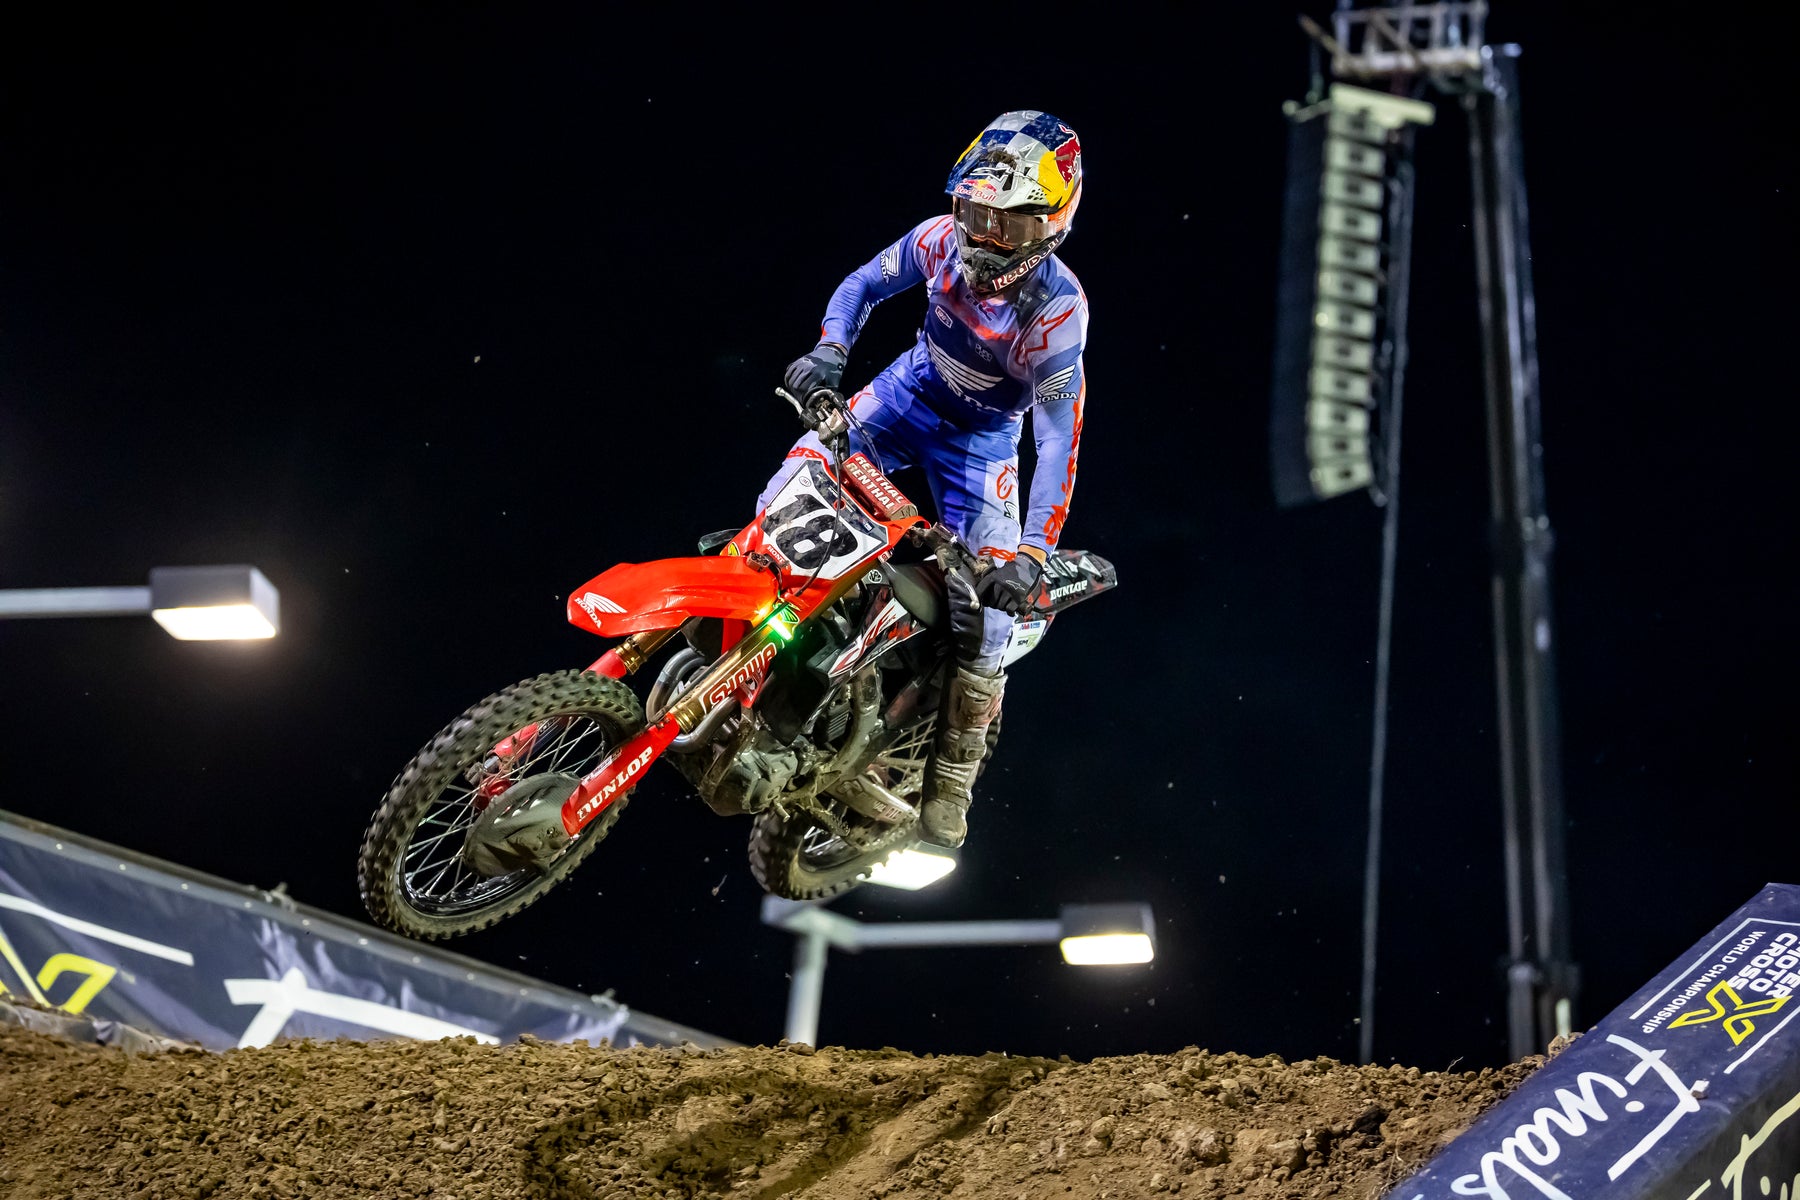 JETT LAWRENCE WINS SUPERMOTOCROSS WORLD CHAMPIONSHIP ROUND AT CHICAGOLAND SPEEDWAY, ILLINOIS